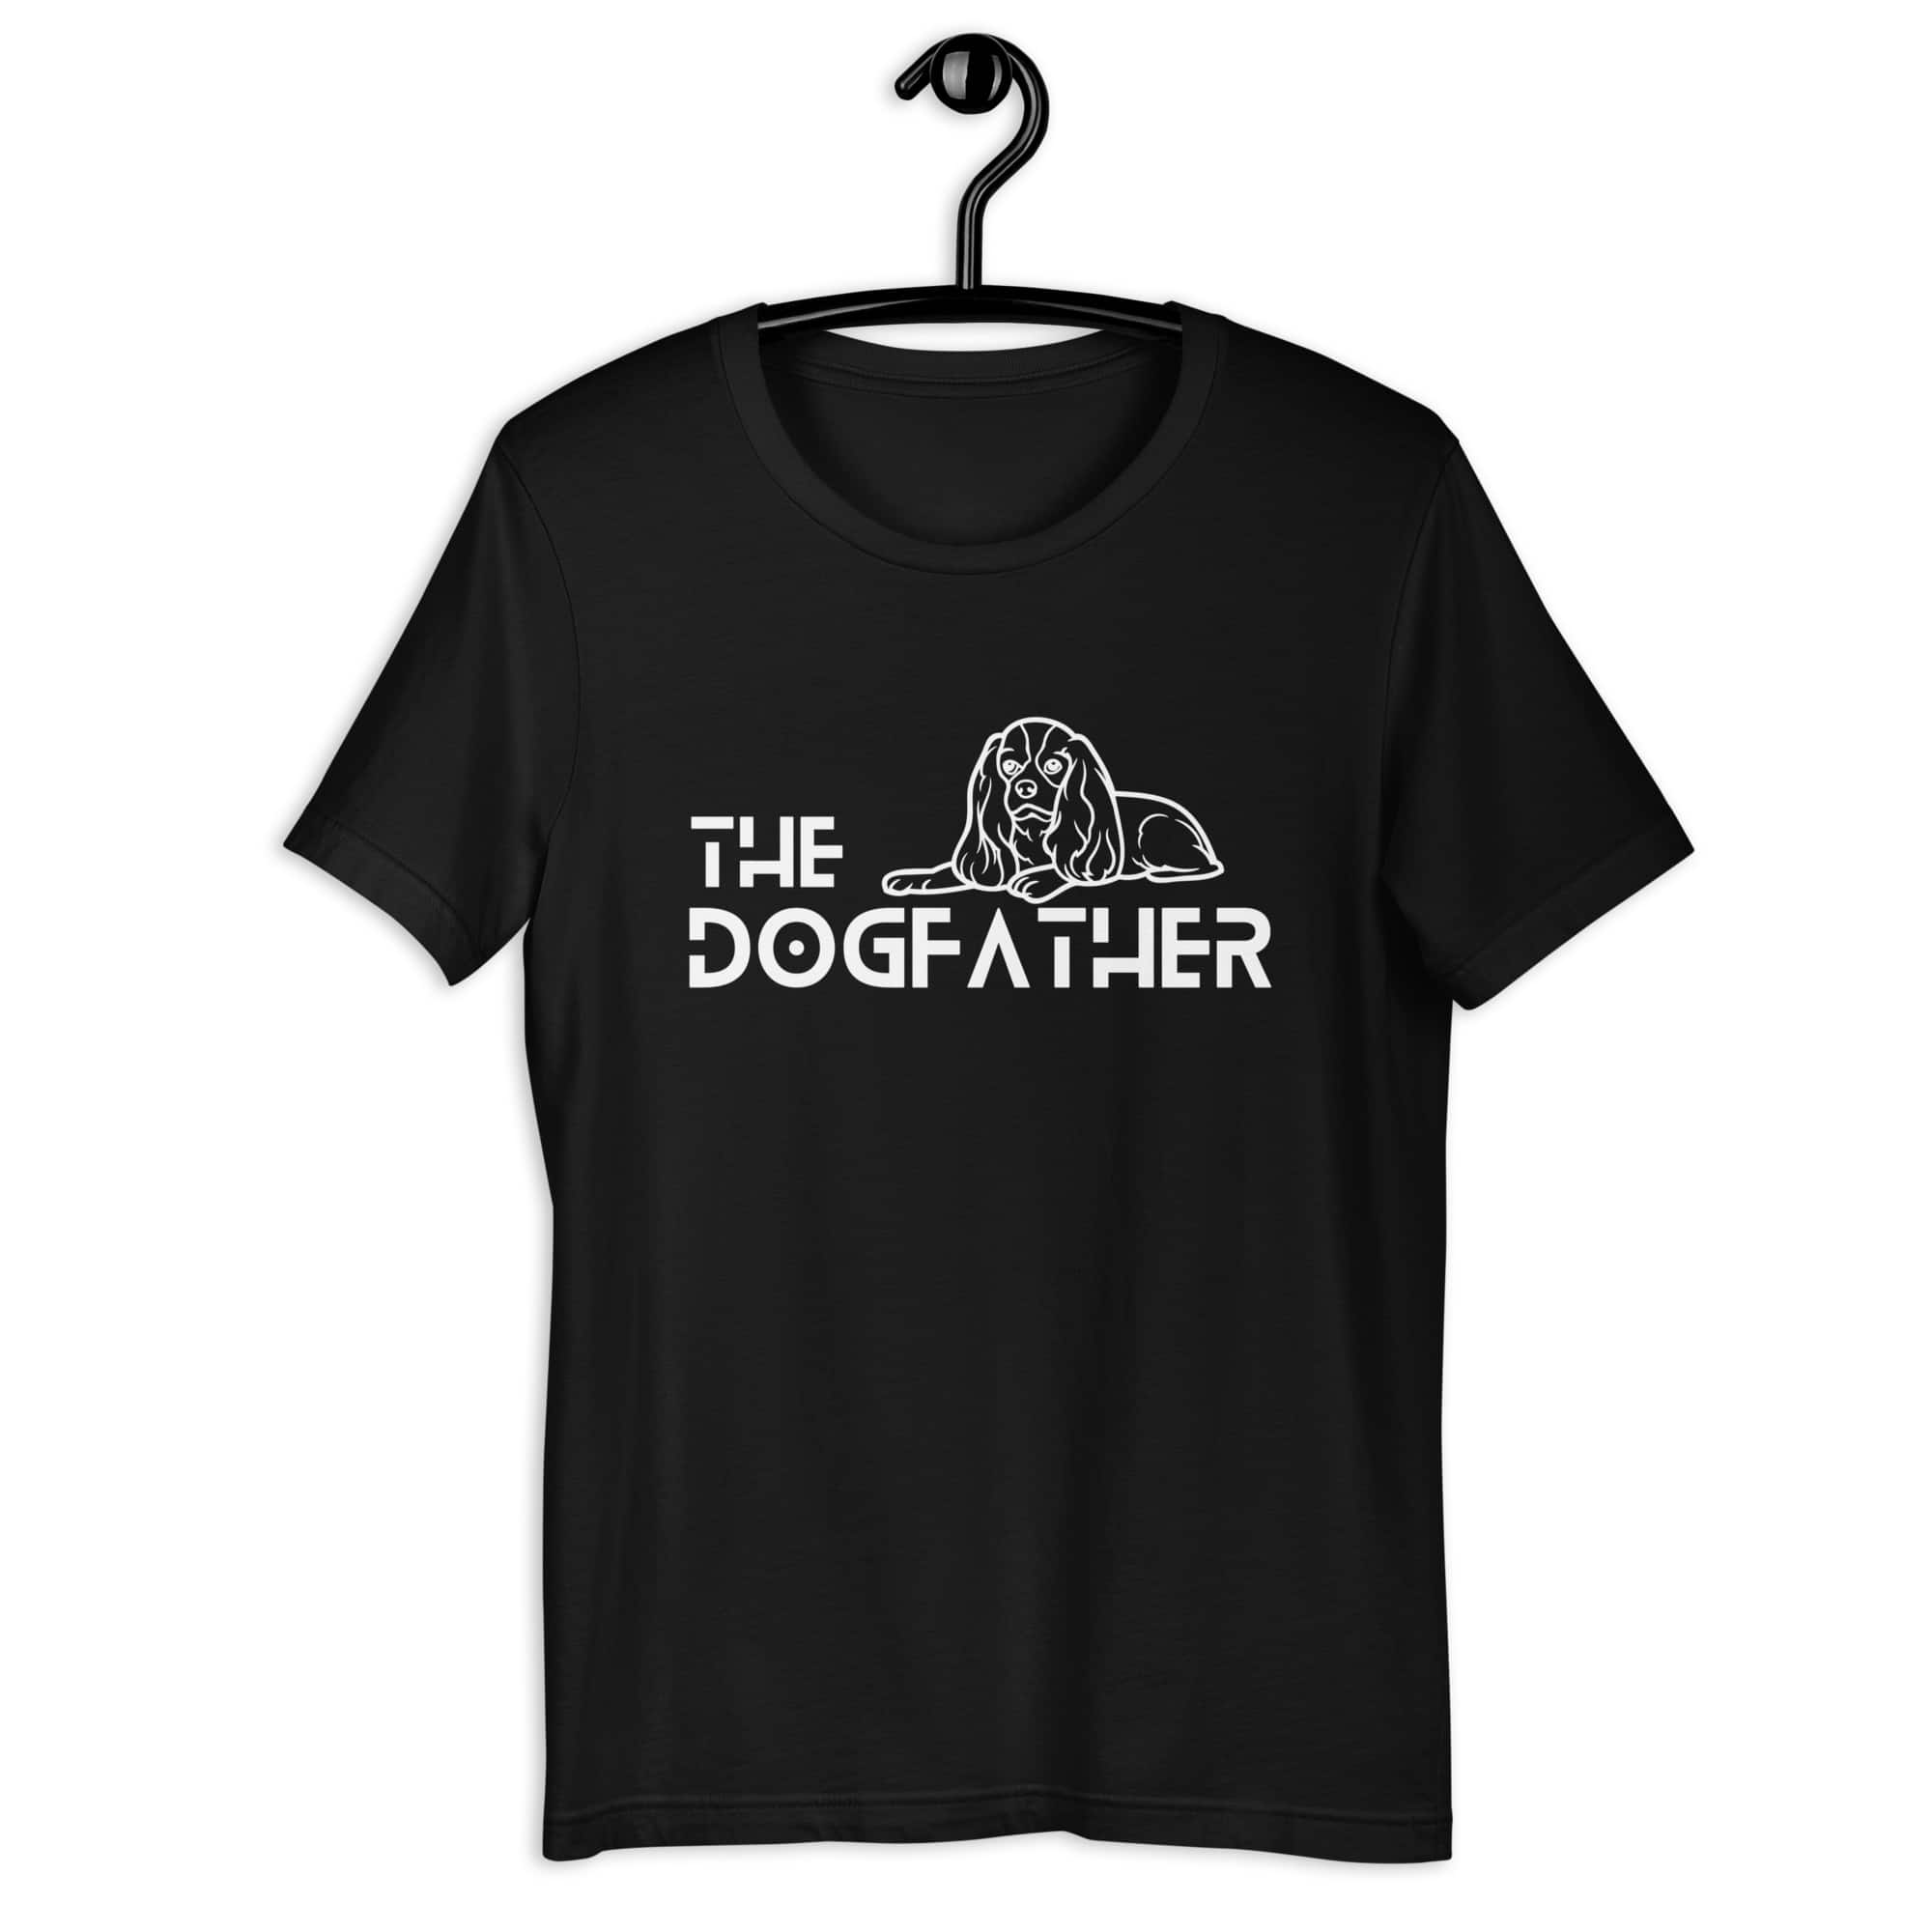 The Dogfather Hounds Unisex T-Shirt. Black